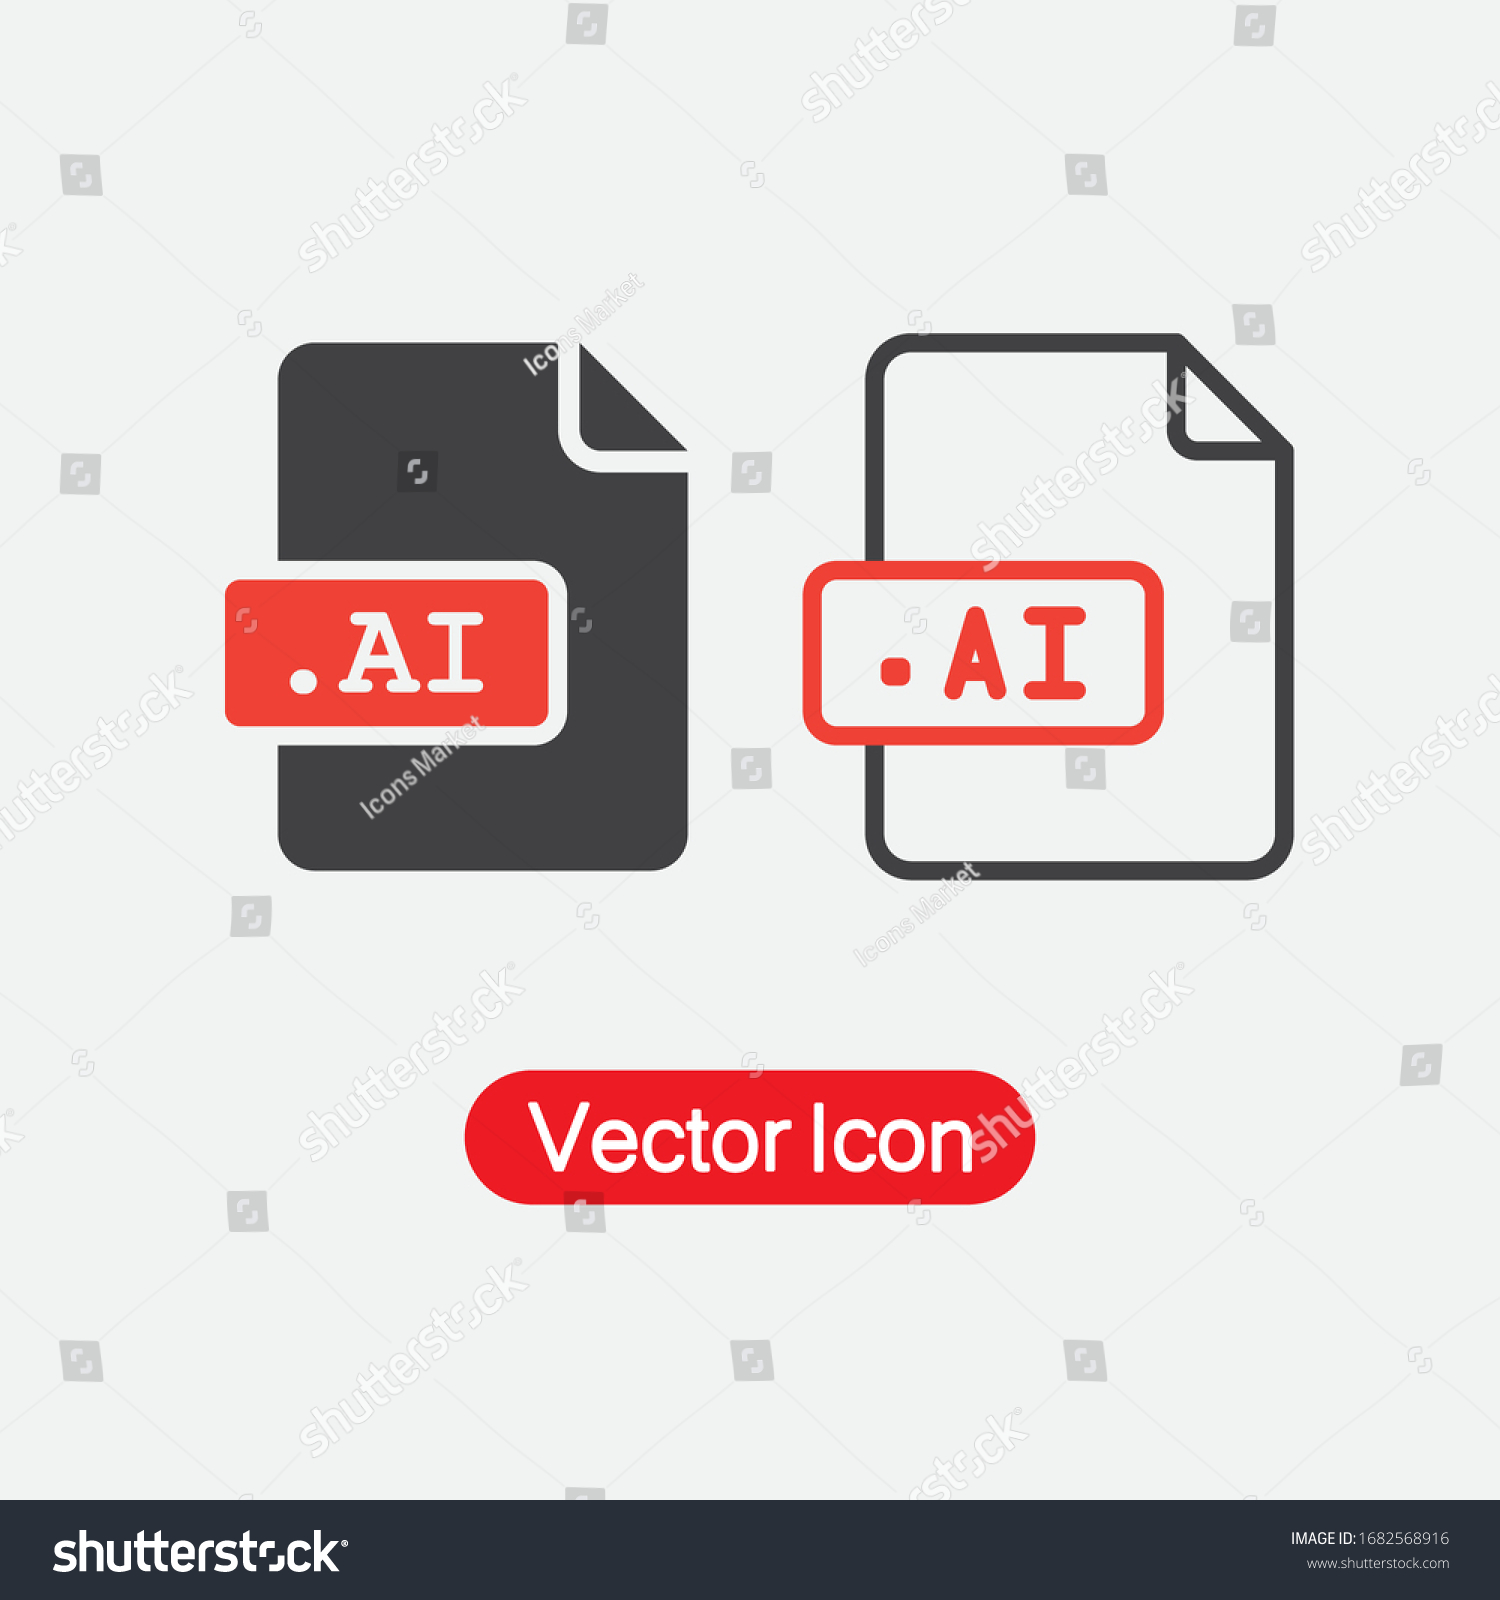 Ai File Icon Vector Illustration Eps10 Stock Vector Royalty Free